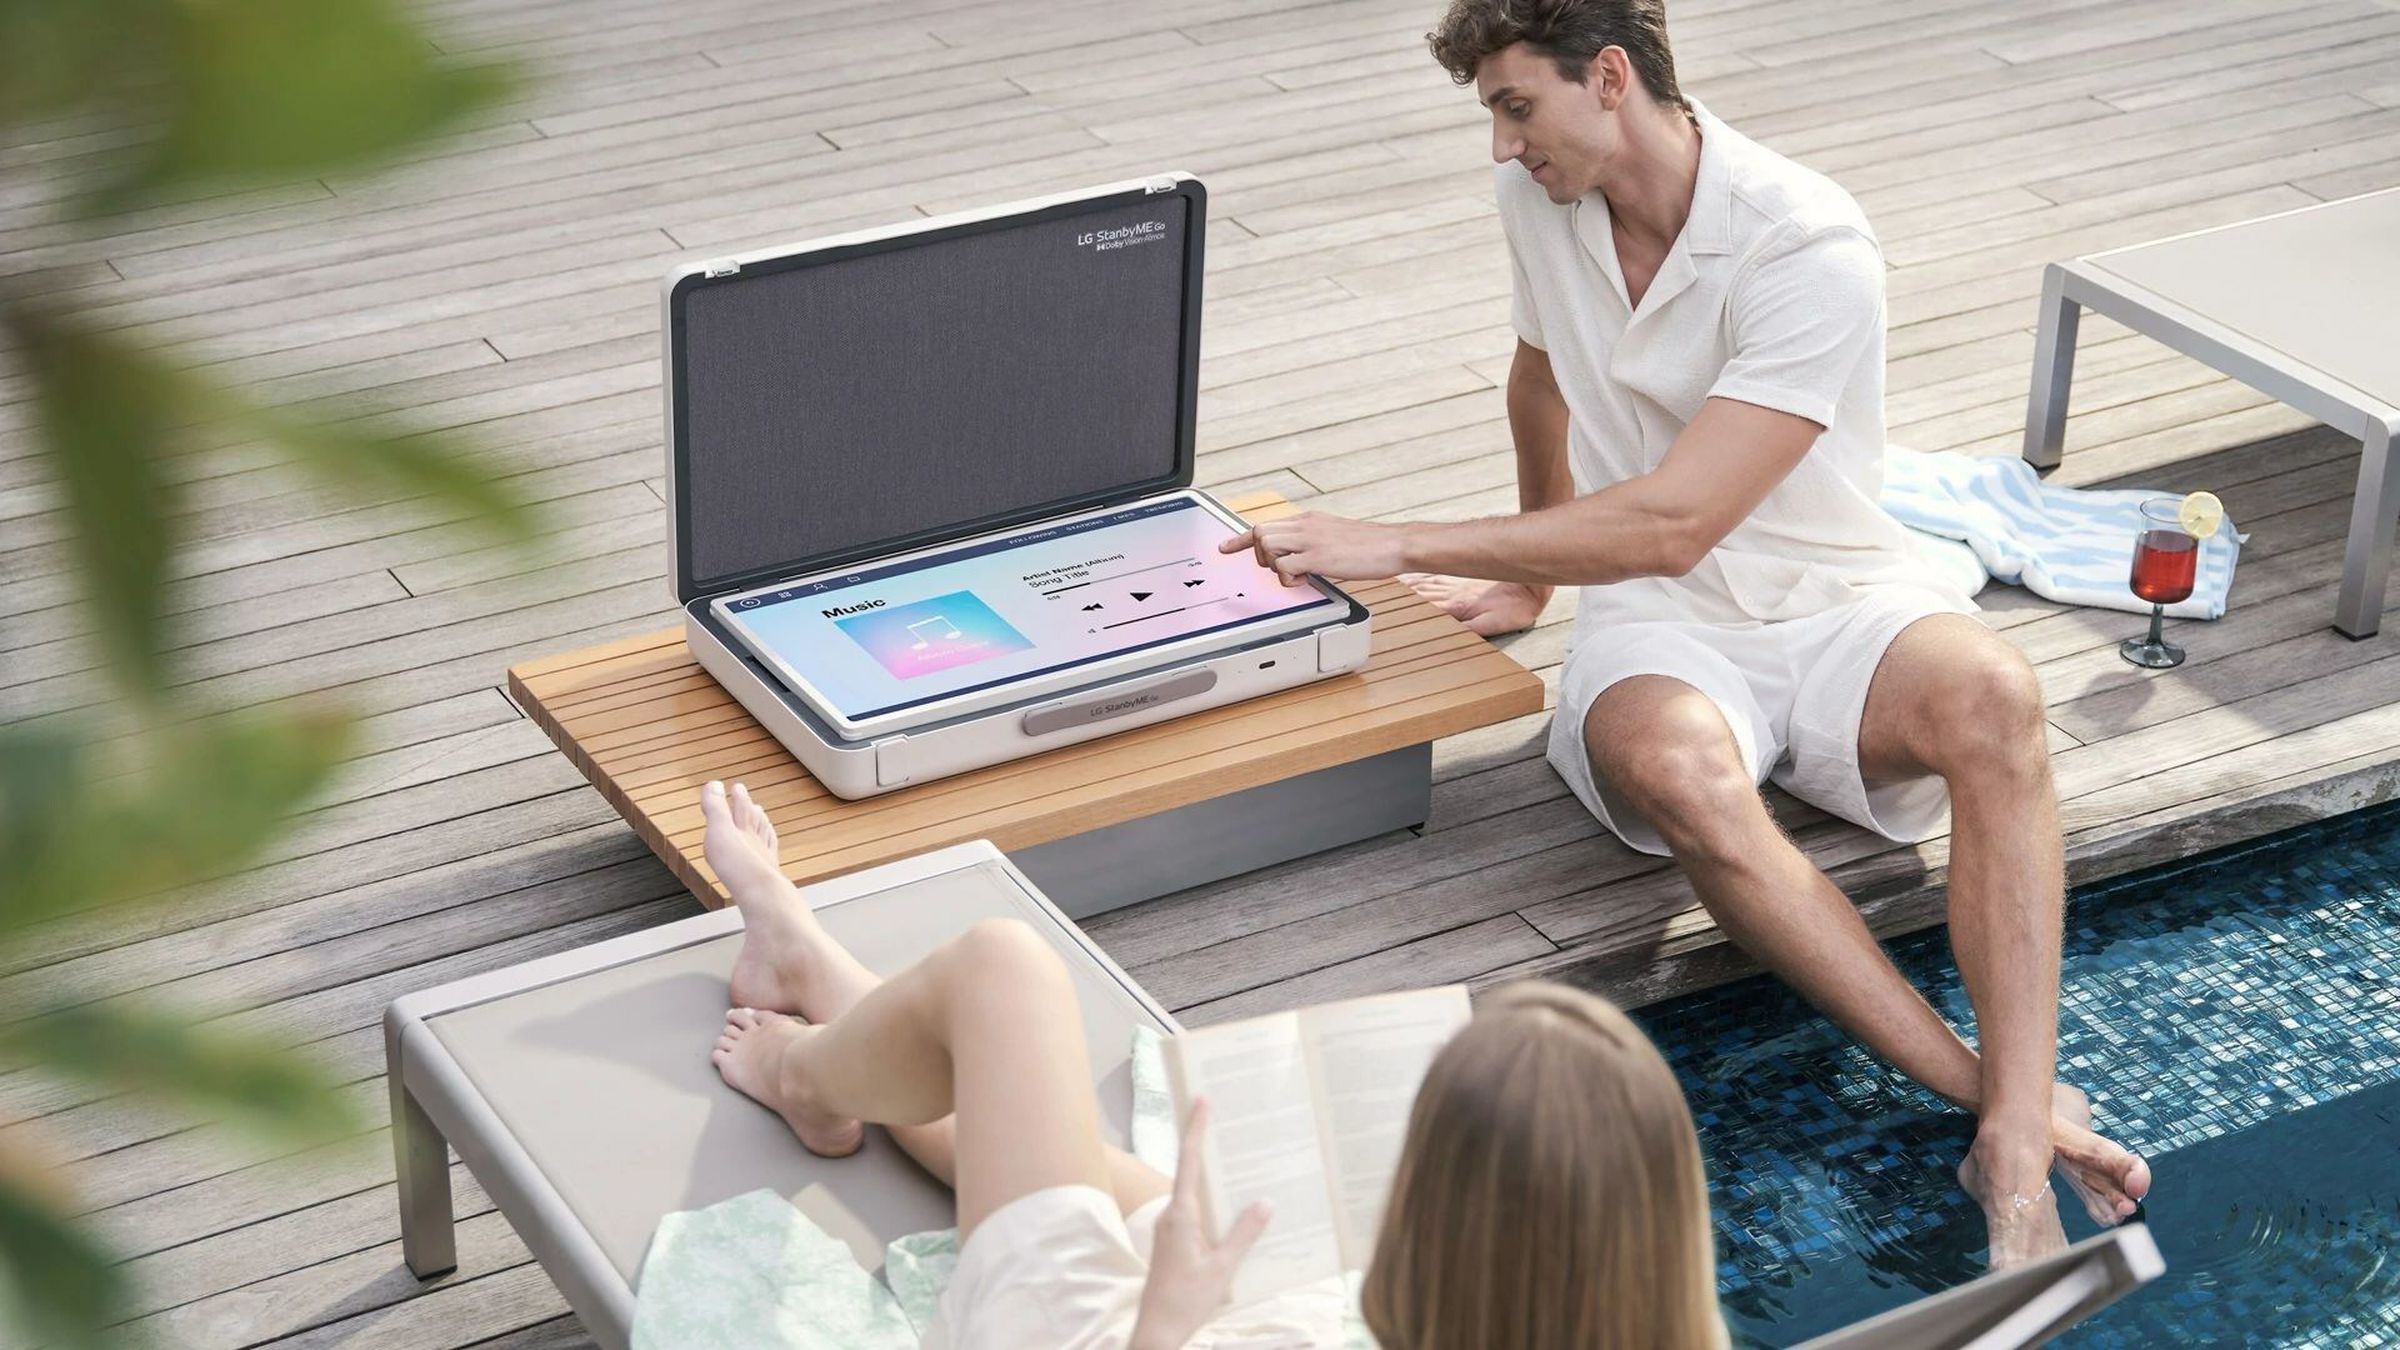 A photo of LG’s StanbyMe Go on a back porch near a pool.